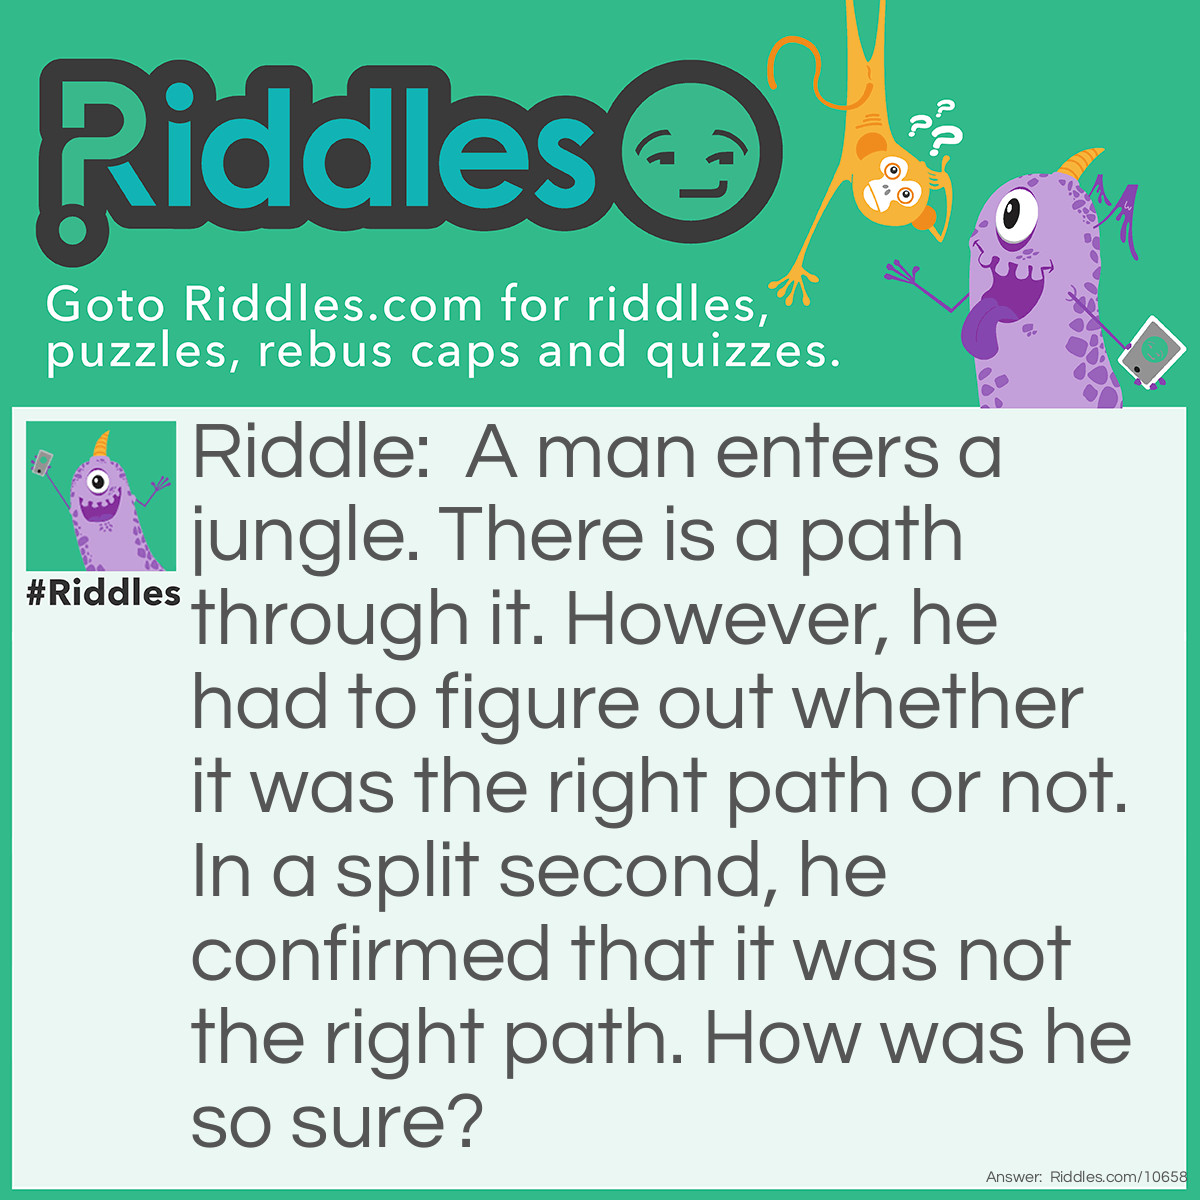 Riddle: A man enters a jungle. There is a path through it. However, he had to figure out whether it was the right path or not. In a split second, he confirmed that it was not the right path. How was he so sure? Answer: He looked carefully at the direction of the path and said it was the left path. Right really has two meanings!